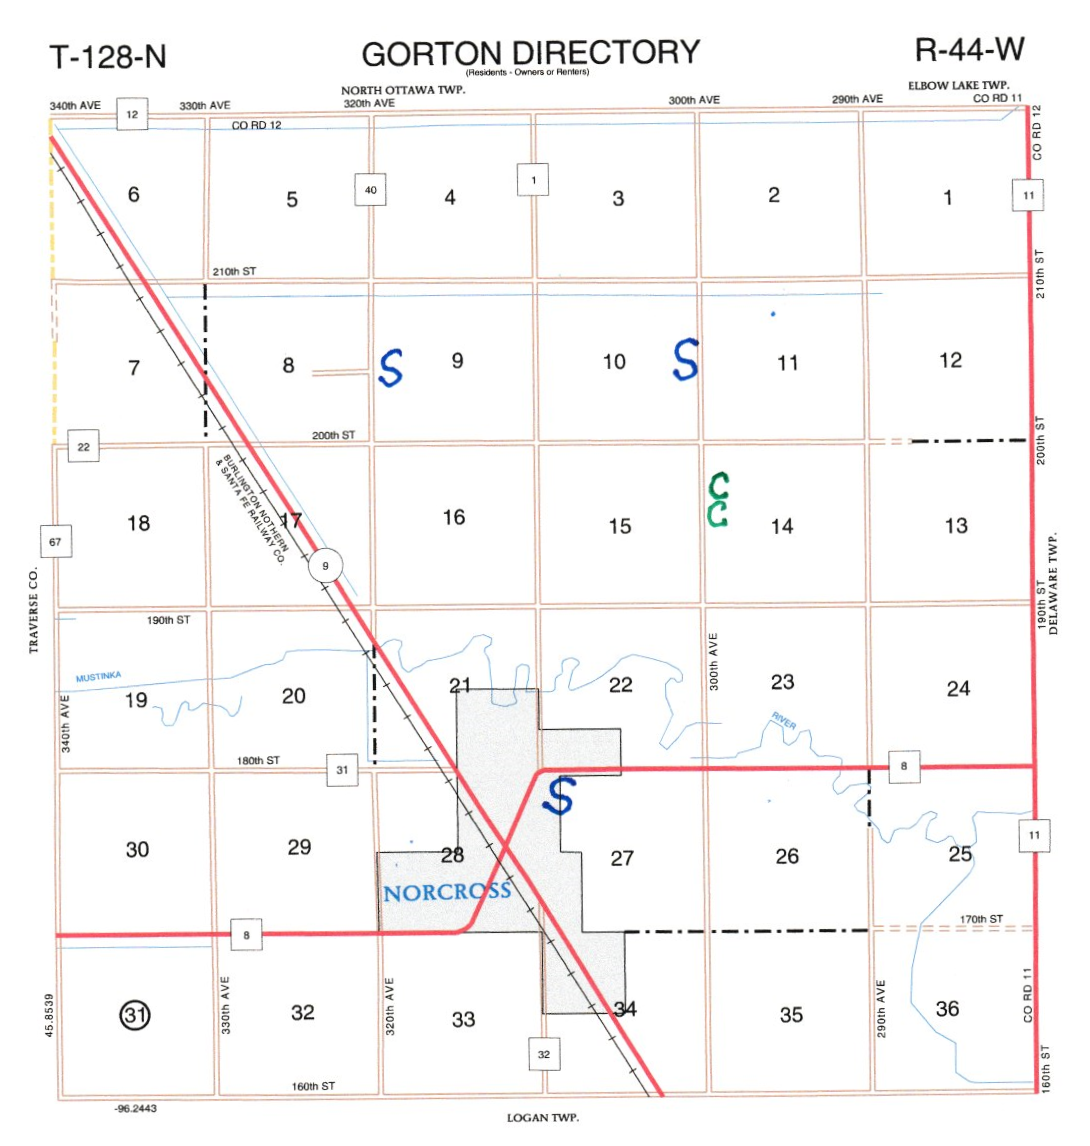 Gorton Township early cemeteries and schools.